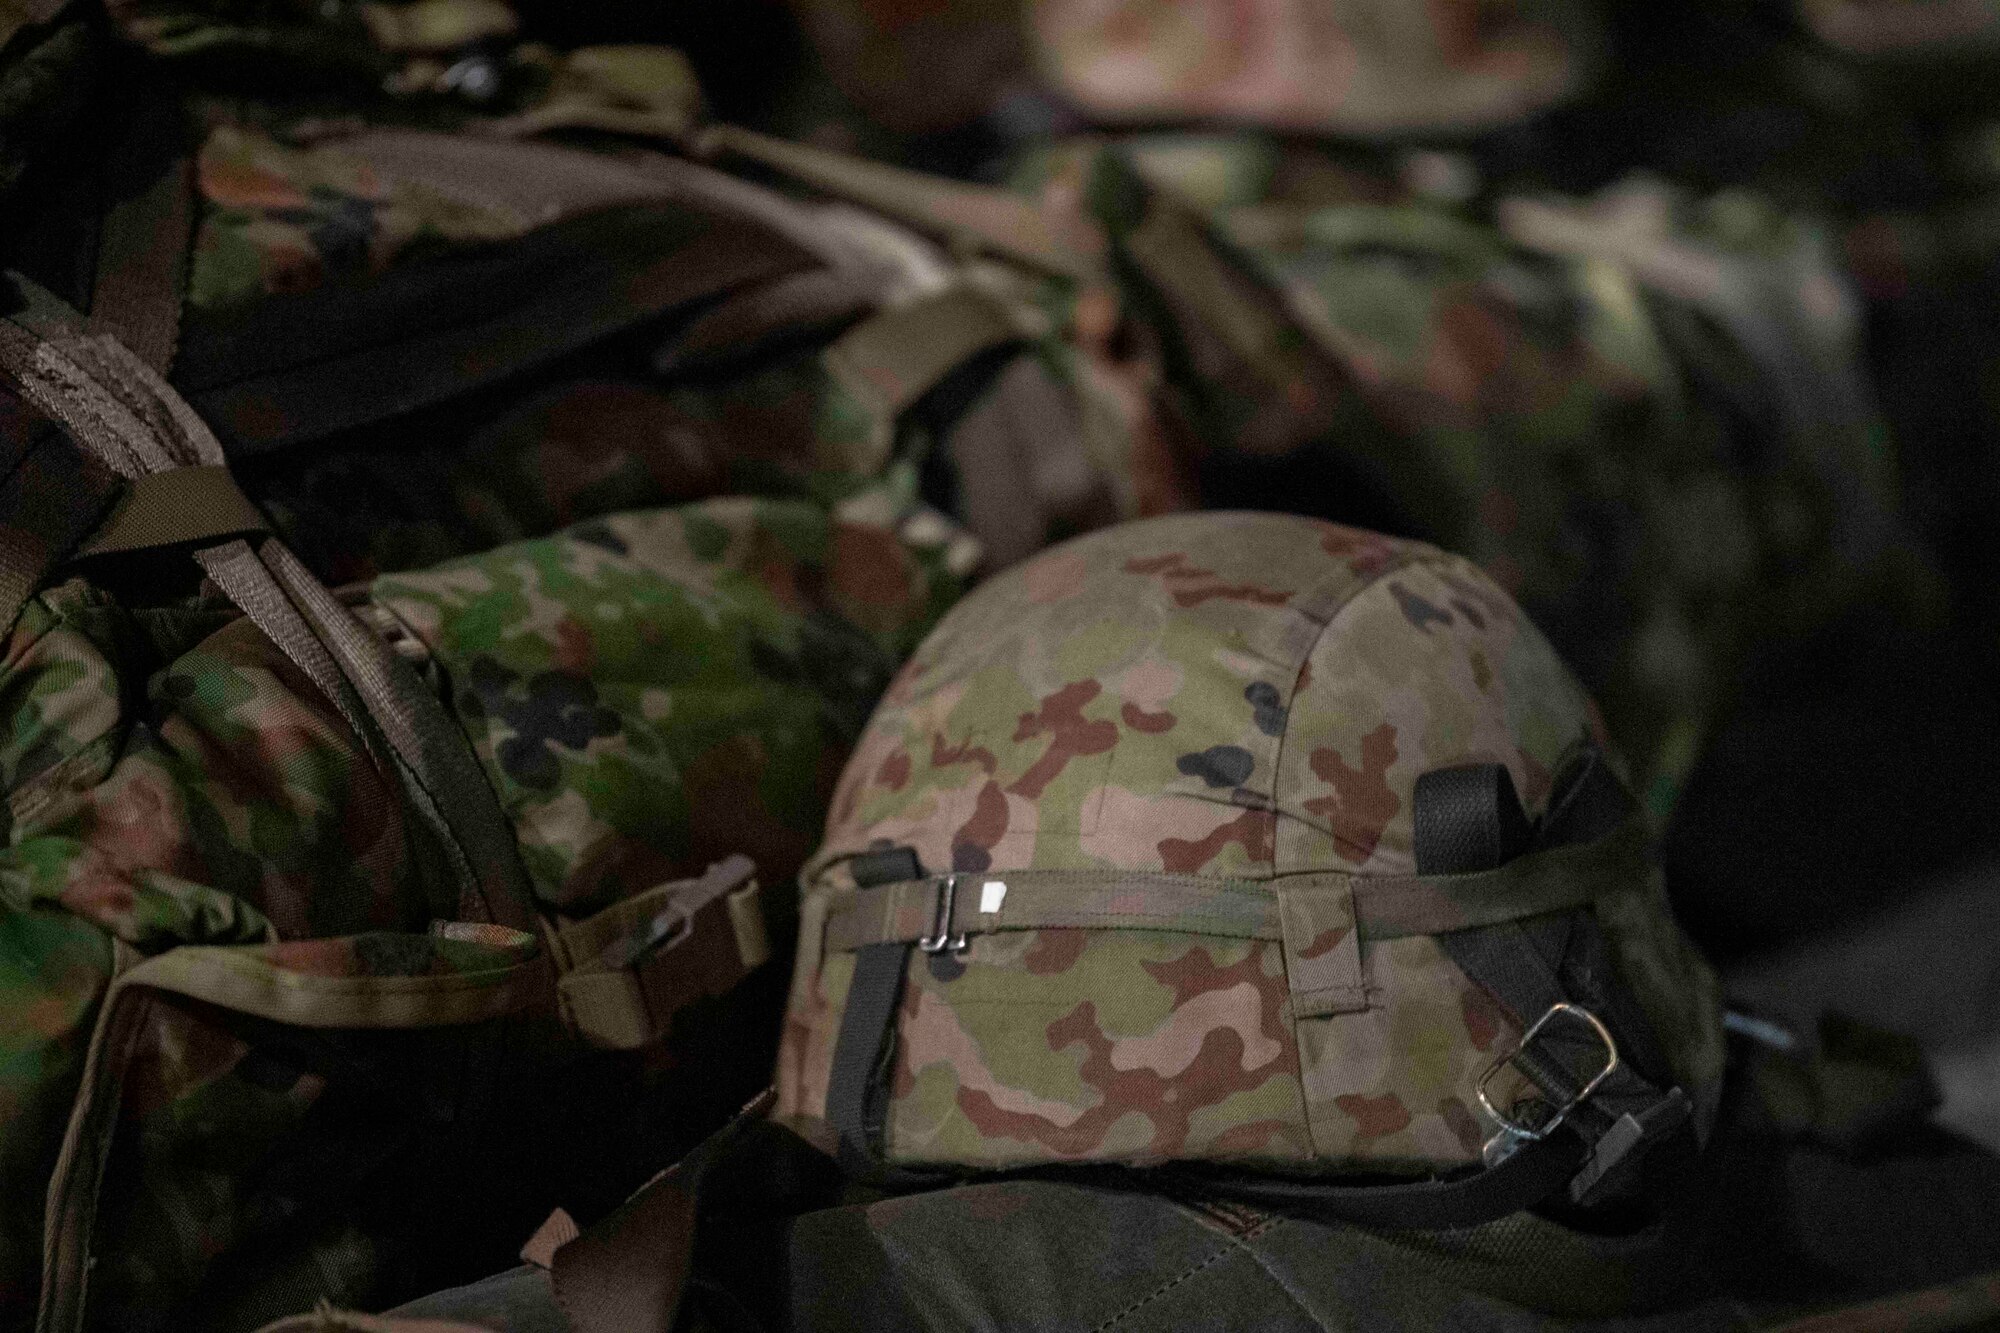 A Japan Ground Self-Defense Force soldier with the 1st Airborne Brigade helmet sits on his gear during Exercise Forager 21 at Yokota Air Base, Japan, July 29, 2021.